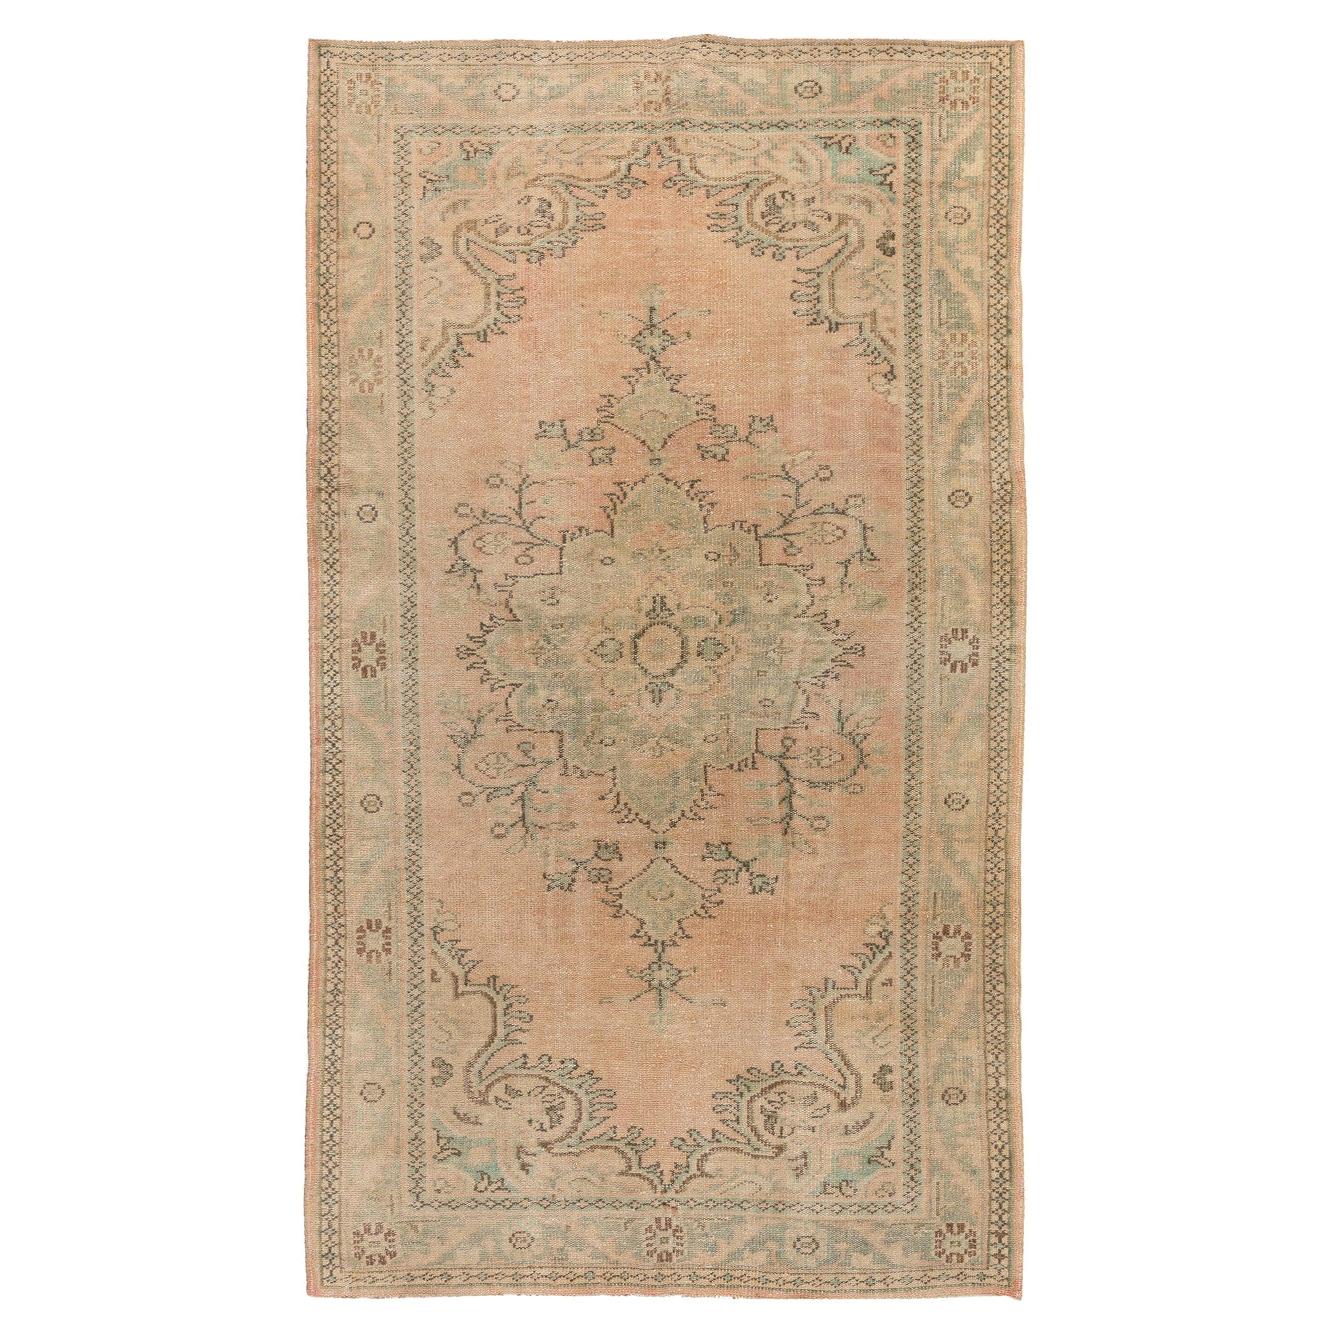 5.7x9.7 Ft Vintage Handmade Oushak Area Rug in Soft, Faded Colors For Sale